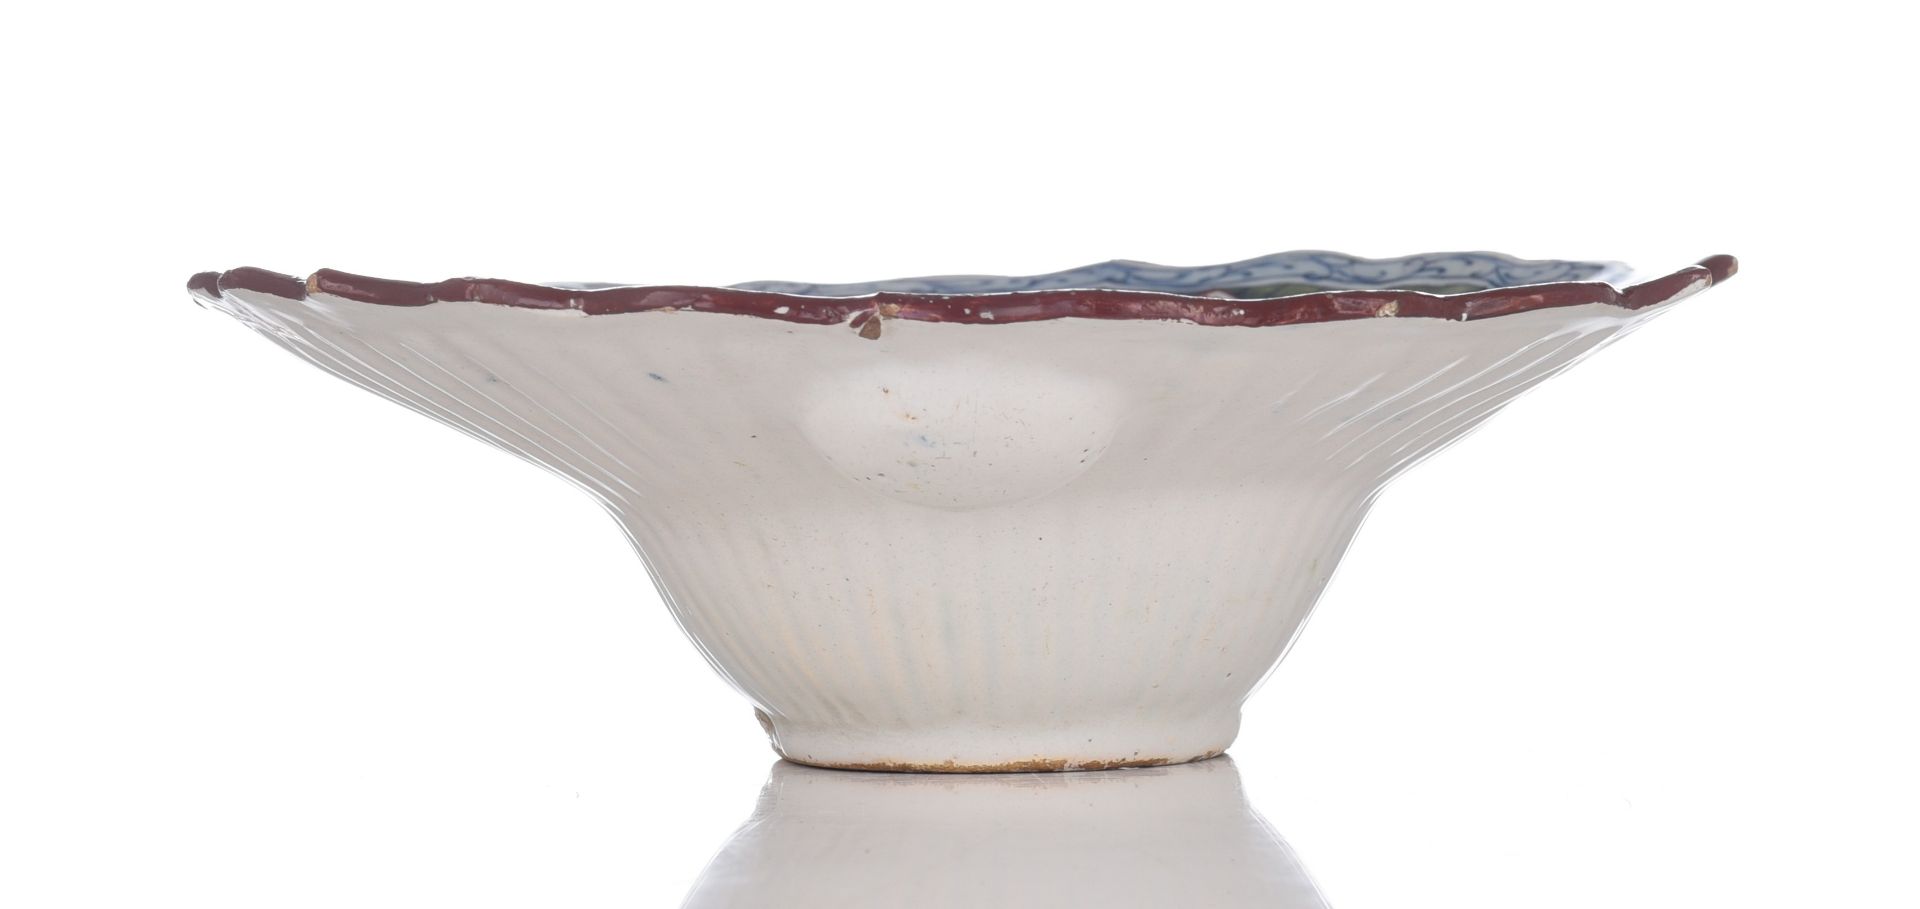 (BIDDING ONLY ON CARLOBONTE.BE) A fine Dutch Delft polychrome barber bowl, marked Jan Theunis Dextra - Image 6 of 10